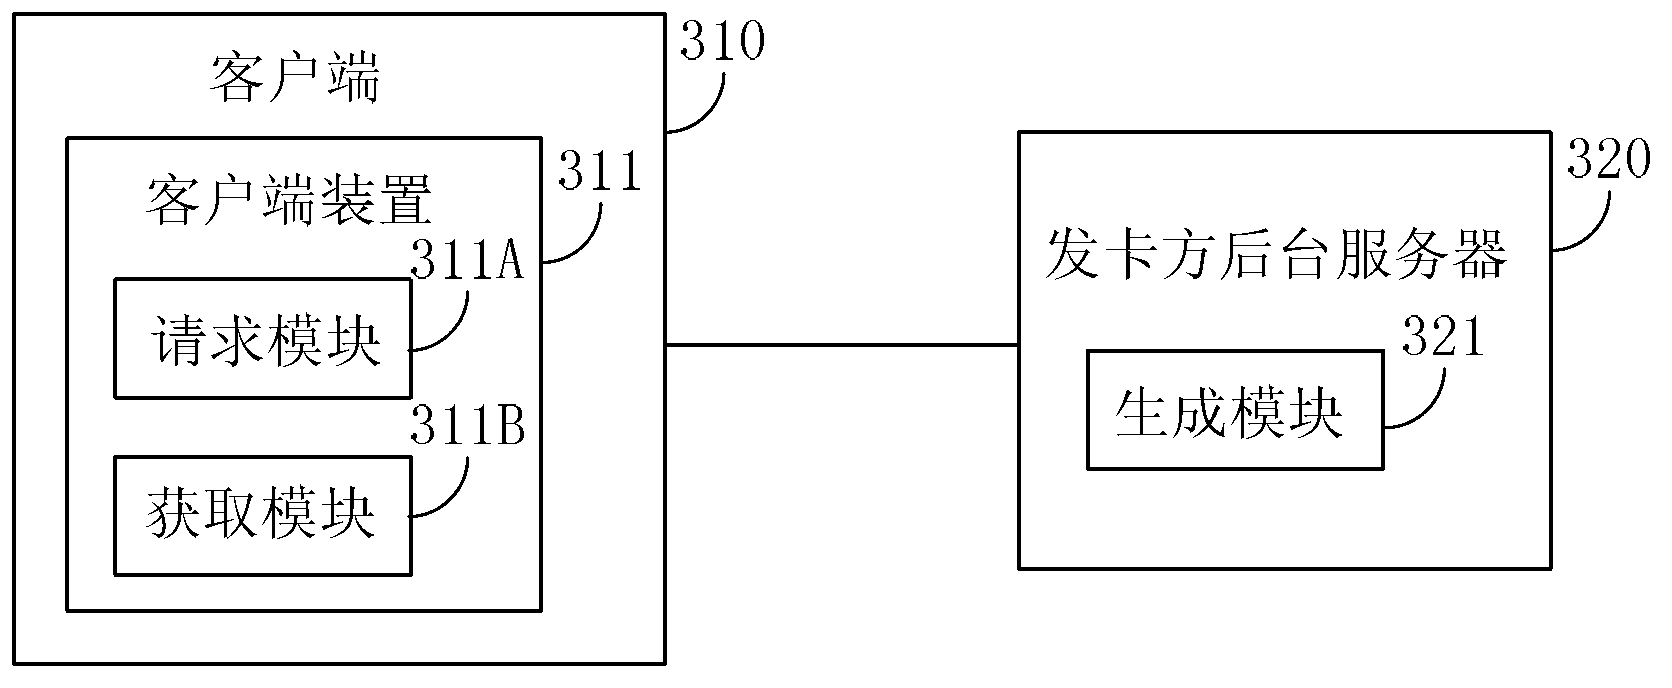 Method and system of generation of dynamic encrypt key of encryption secure digital memory card (SD)